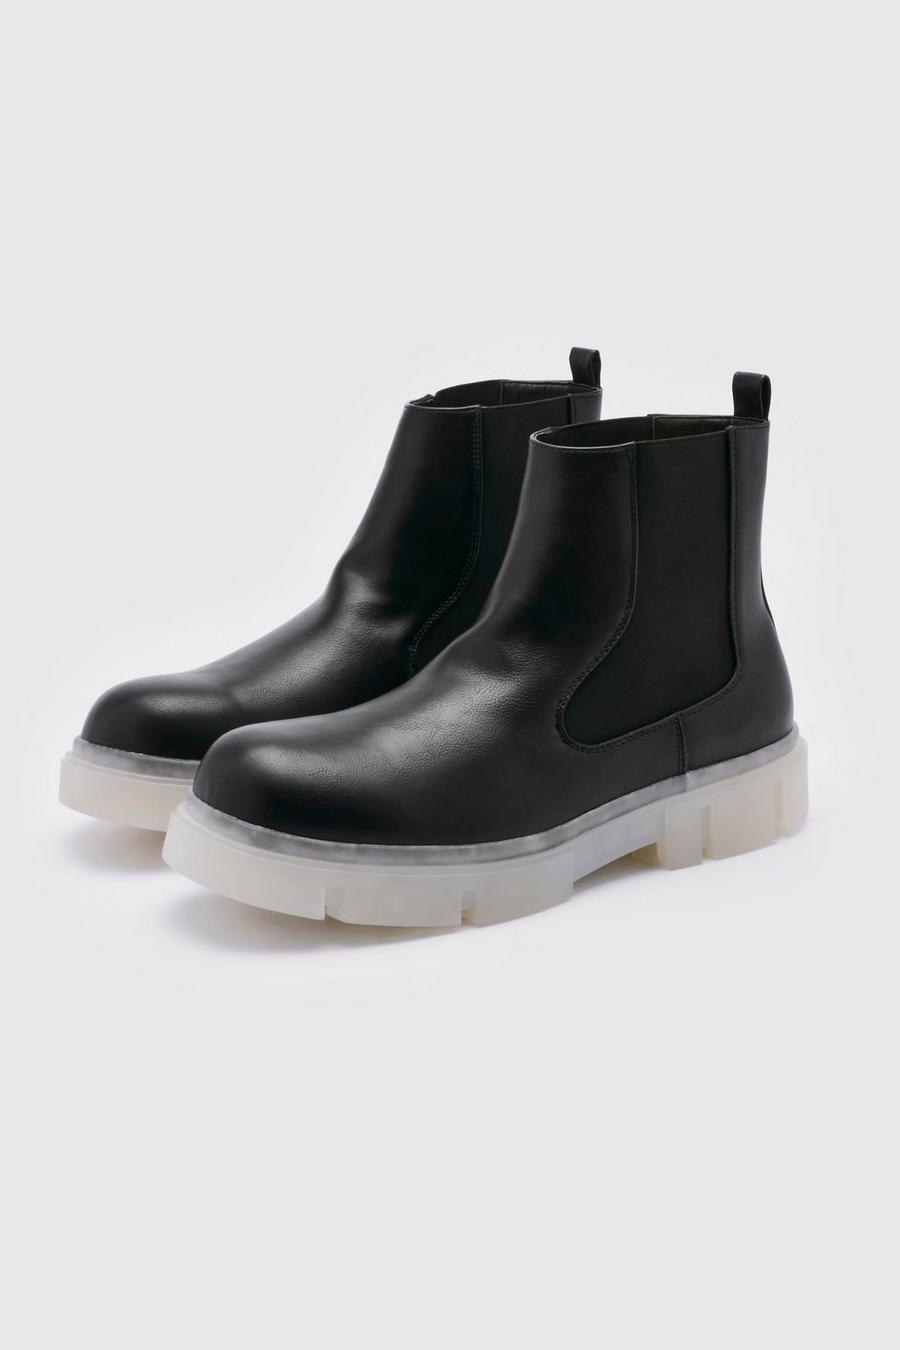 Men's Boots | Men's Ankle, Winter & Dress Boots | boohoo USA